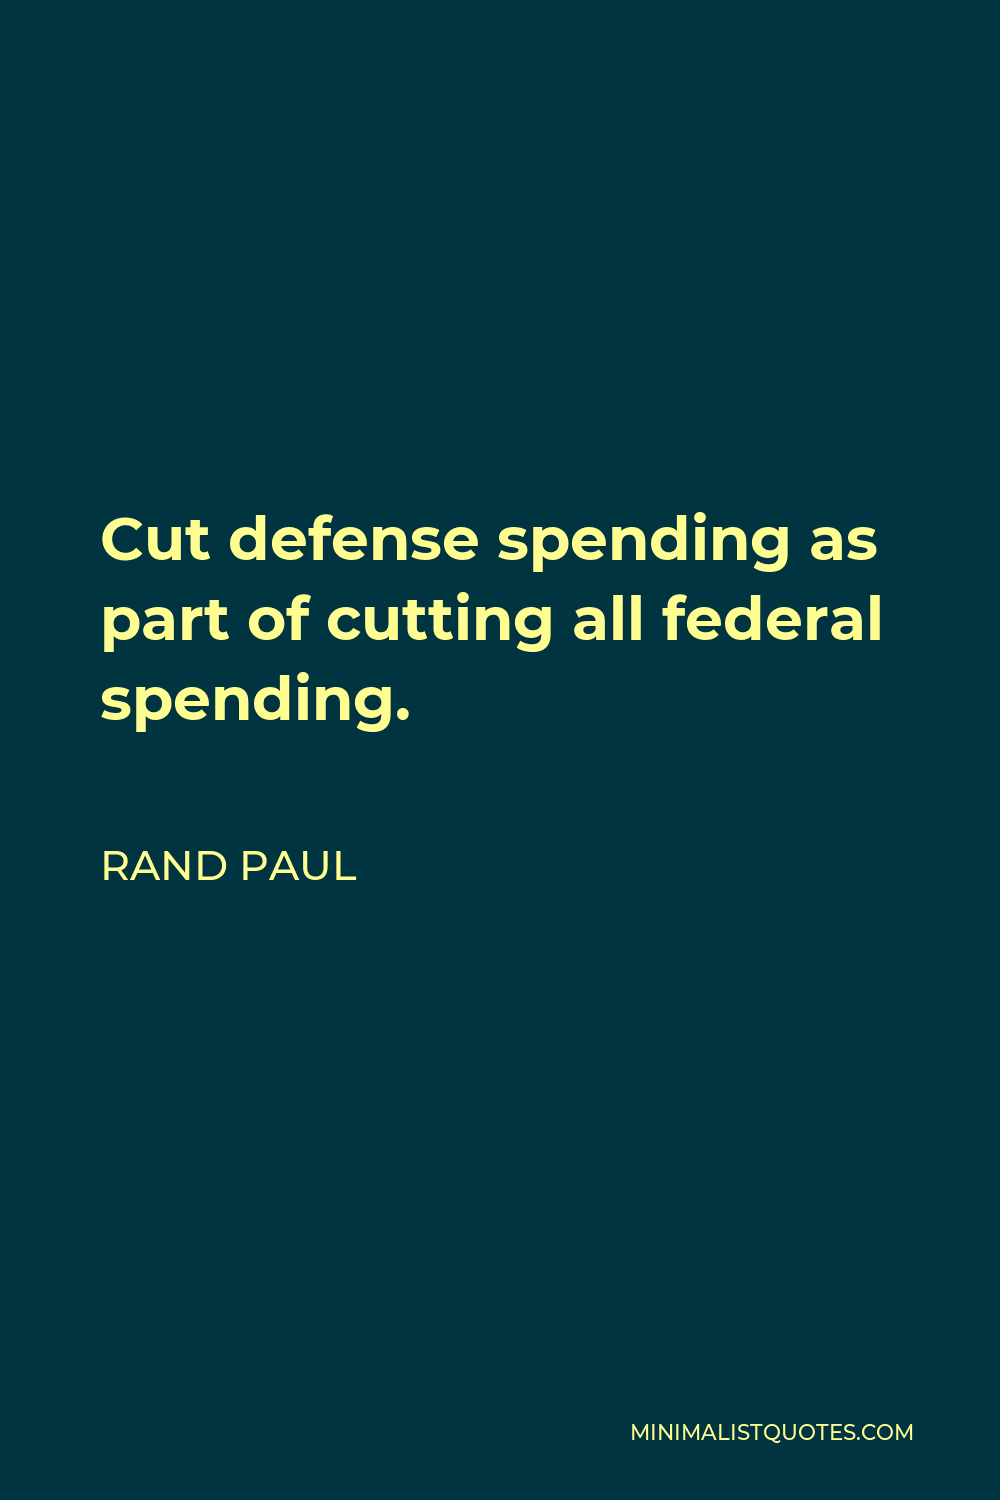 Rand Paul Quote - Cut defense spending as part of cutting all federal spending.